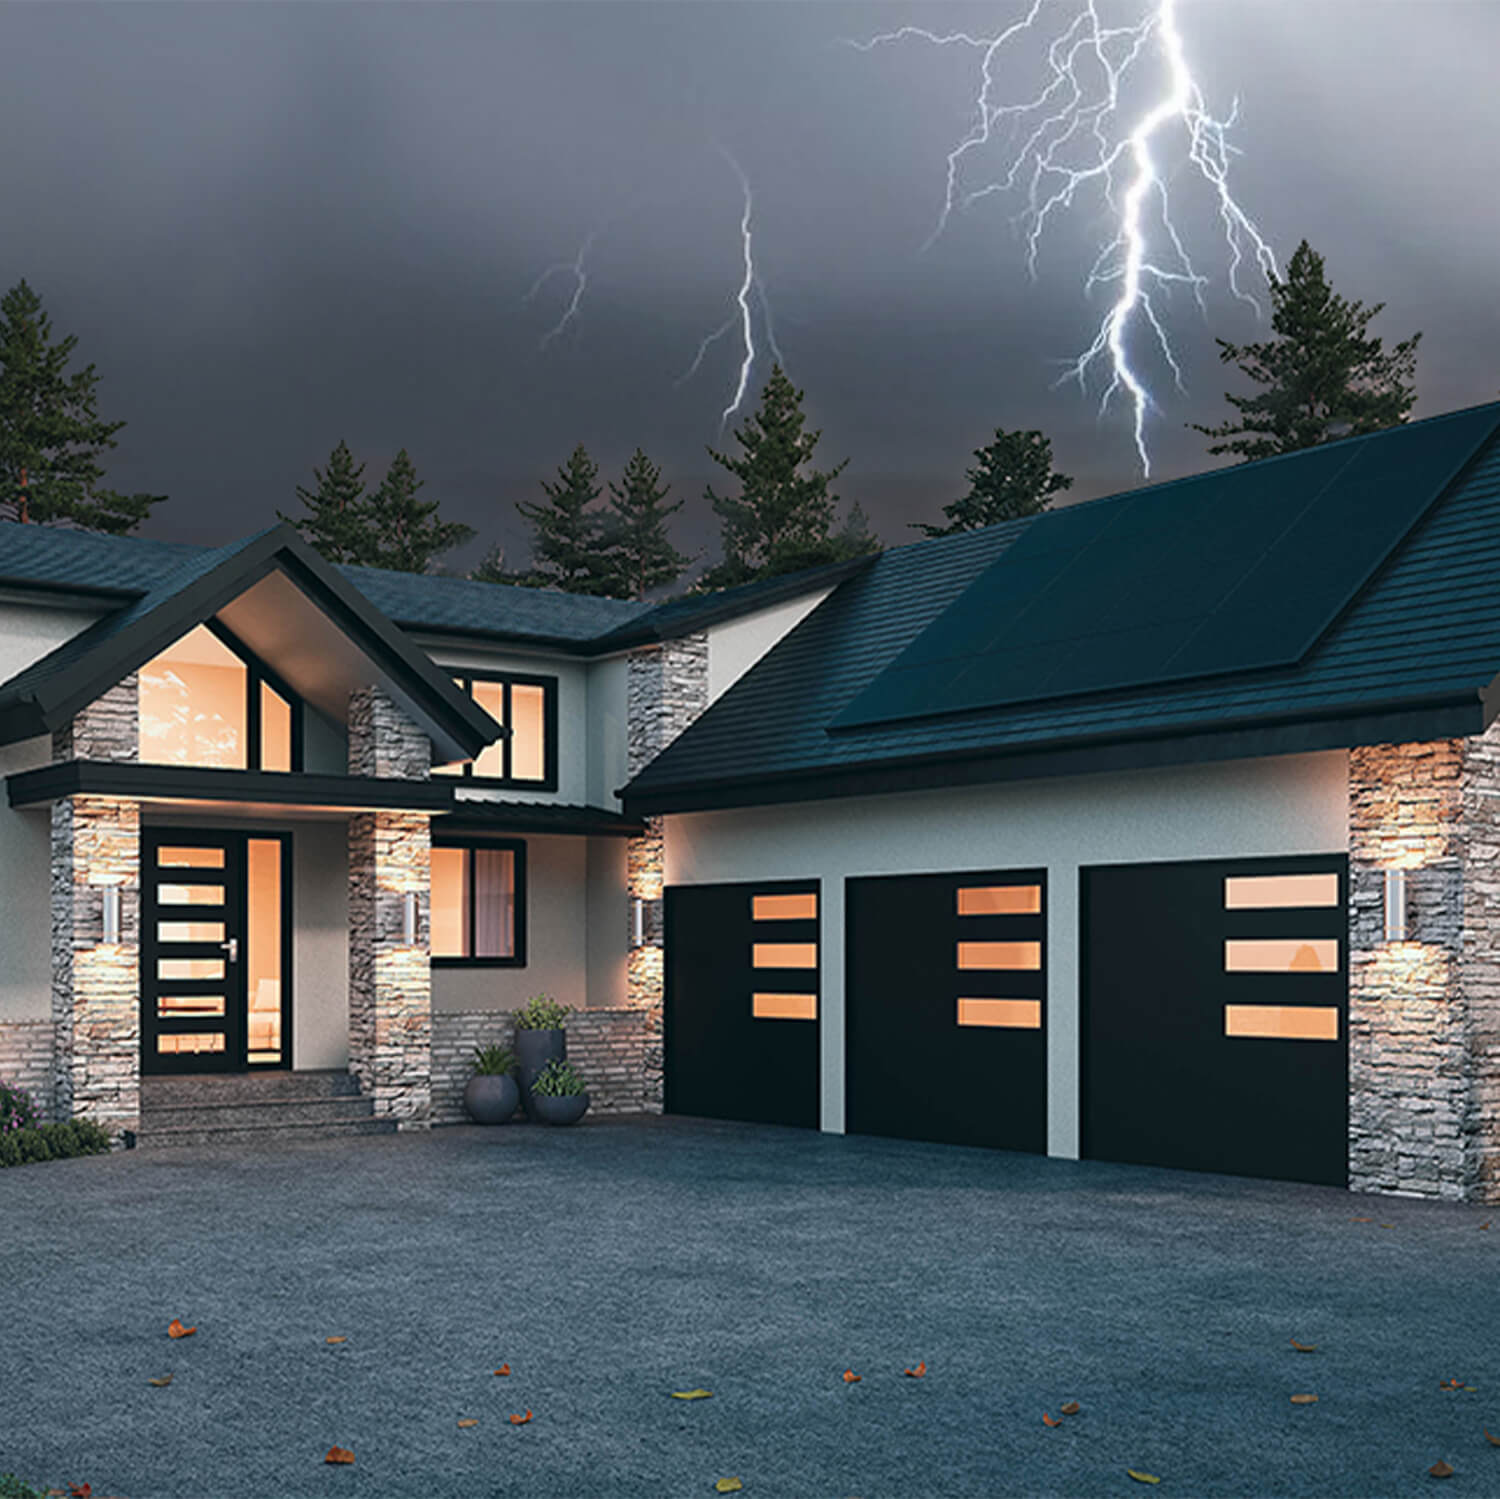 House rendering with natrual tones and black finishes with intense weather conditions in the background